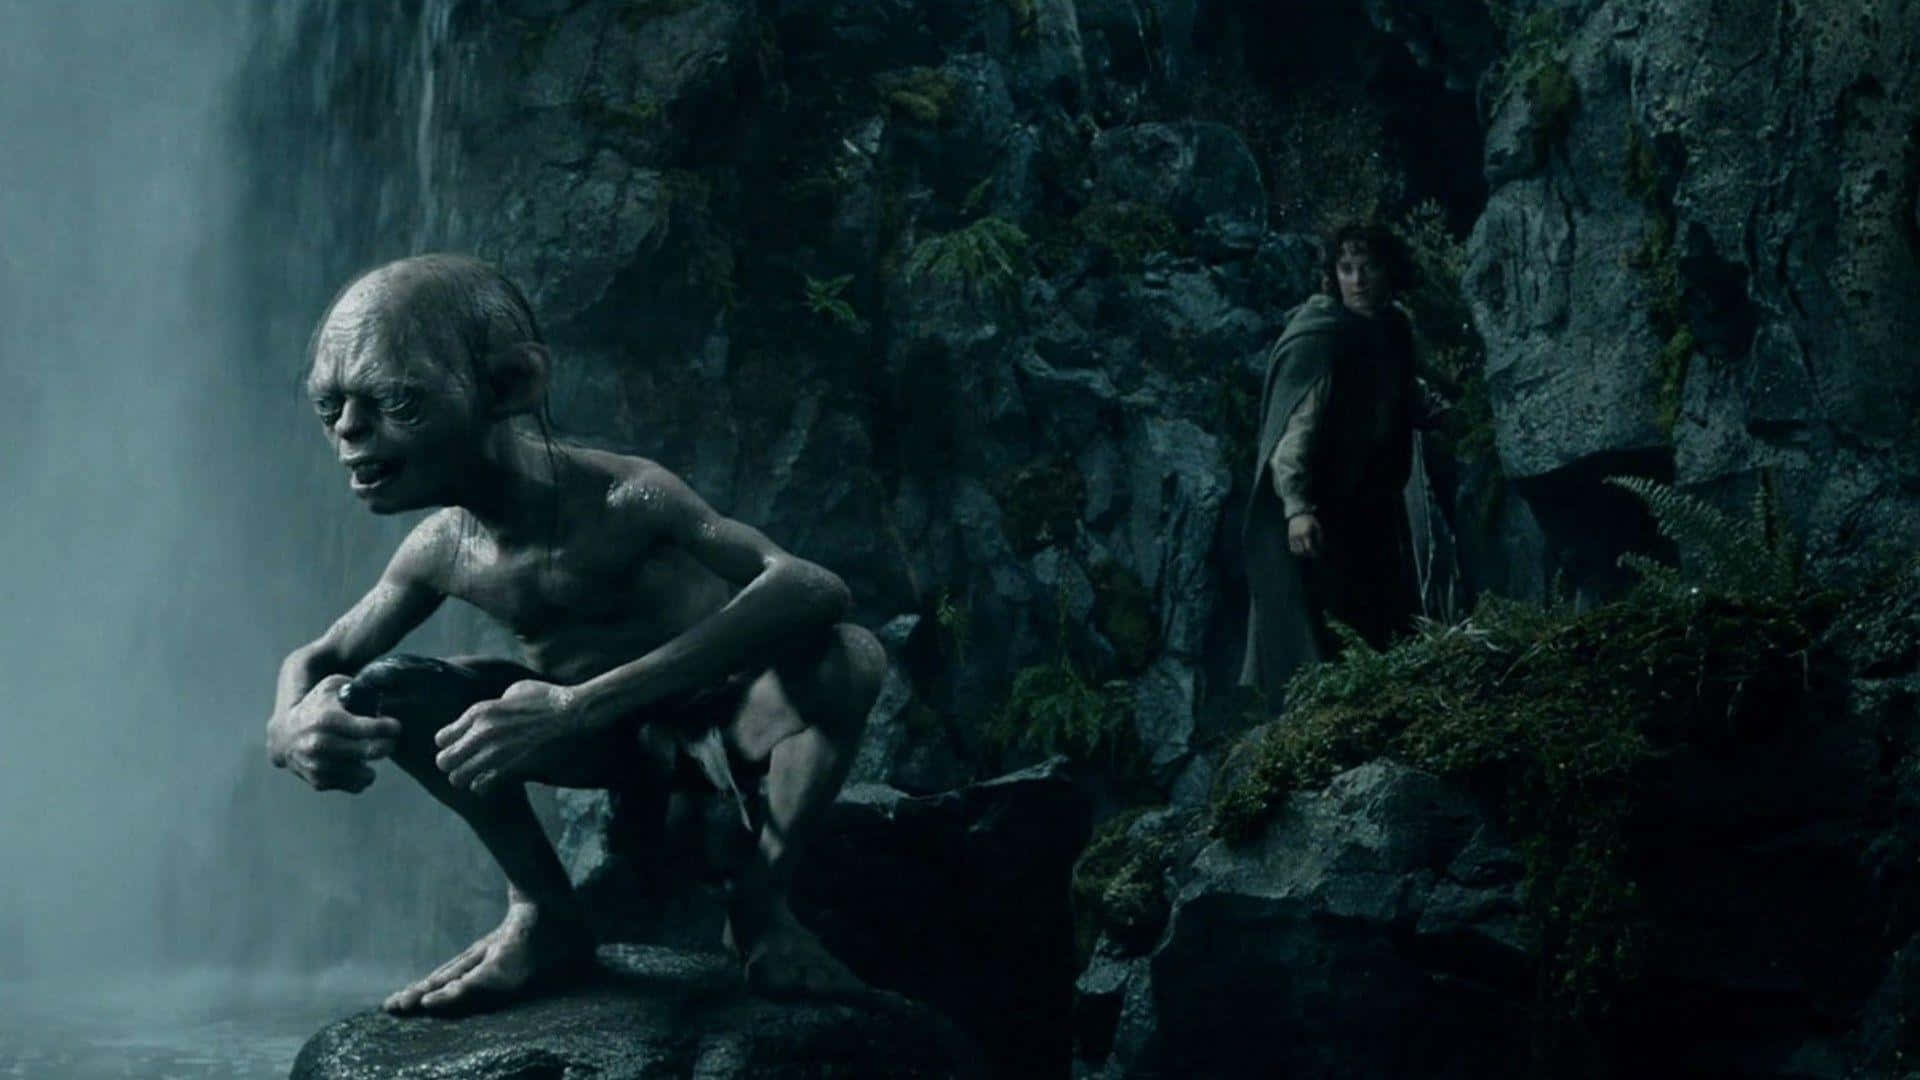 Gollum finding himself lost in Middle Earth